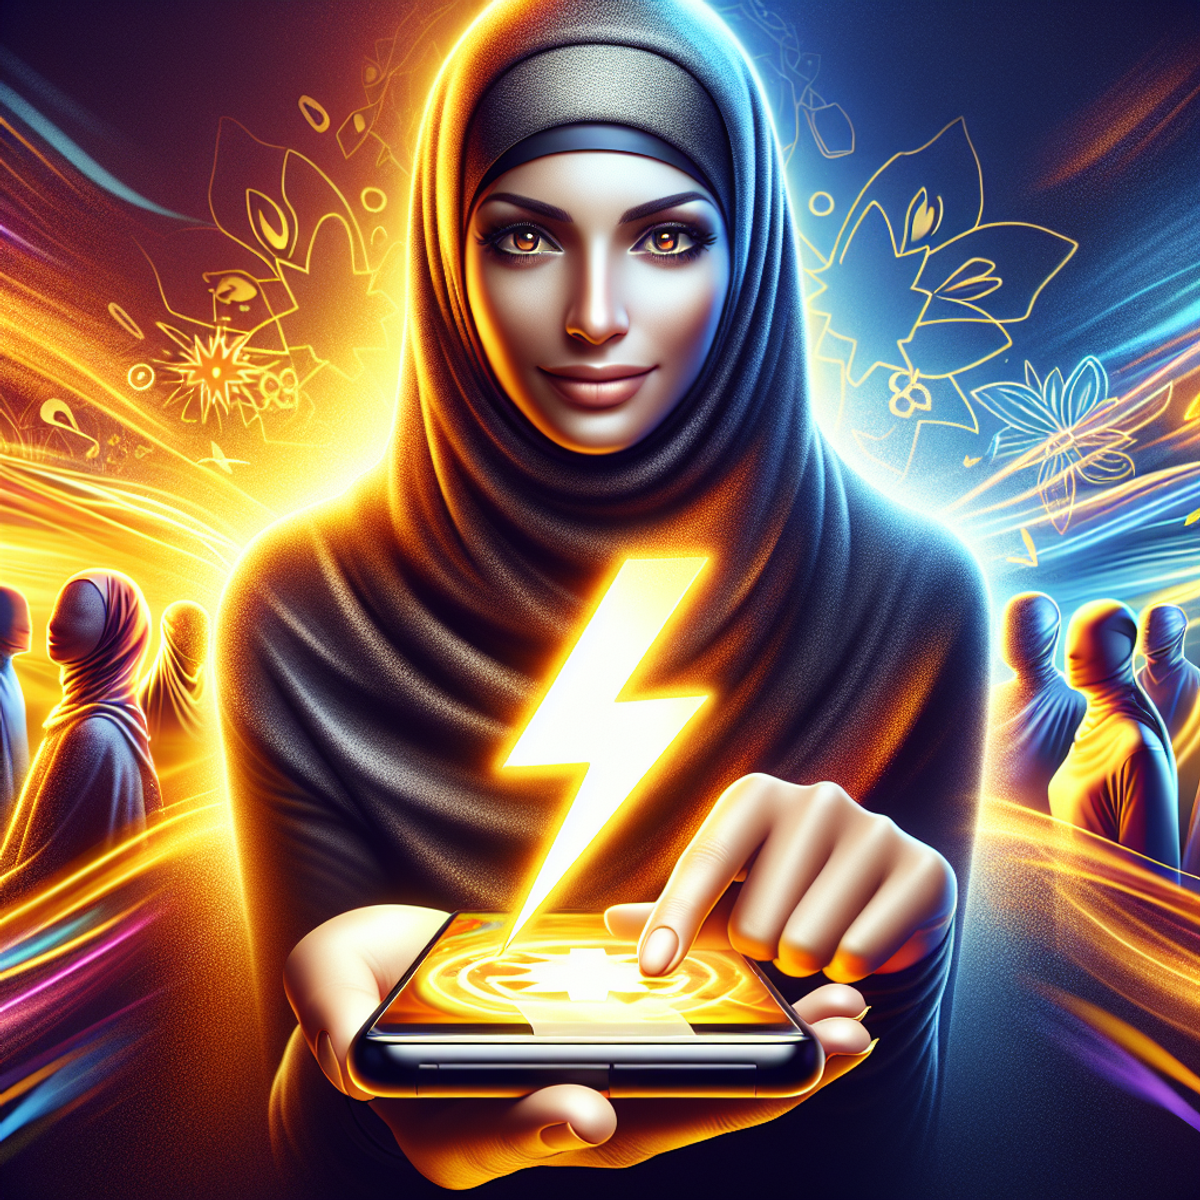 A Middle-Eastern woman holding a modern smartphone with a glowing lightning bolt symbol on the screen, set against a vibrant and energetic background with abstract figures.